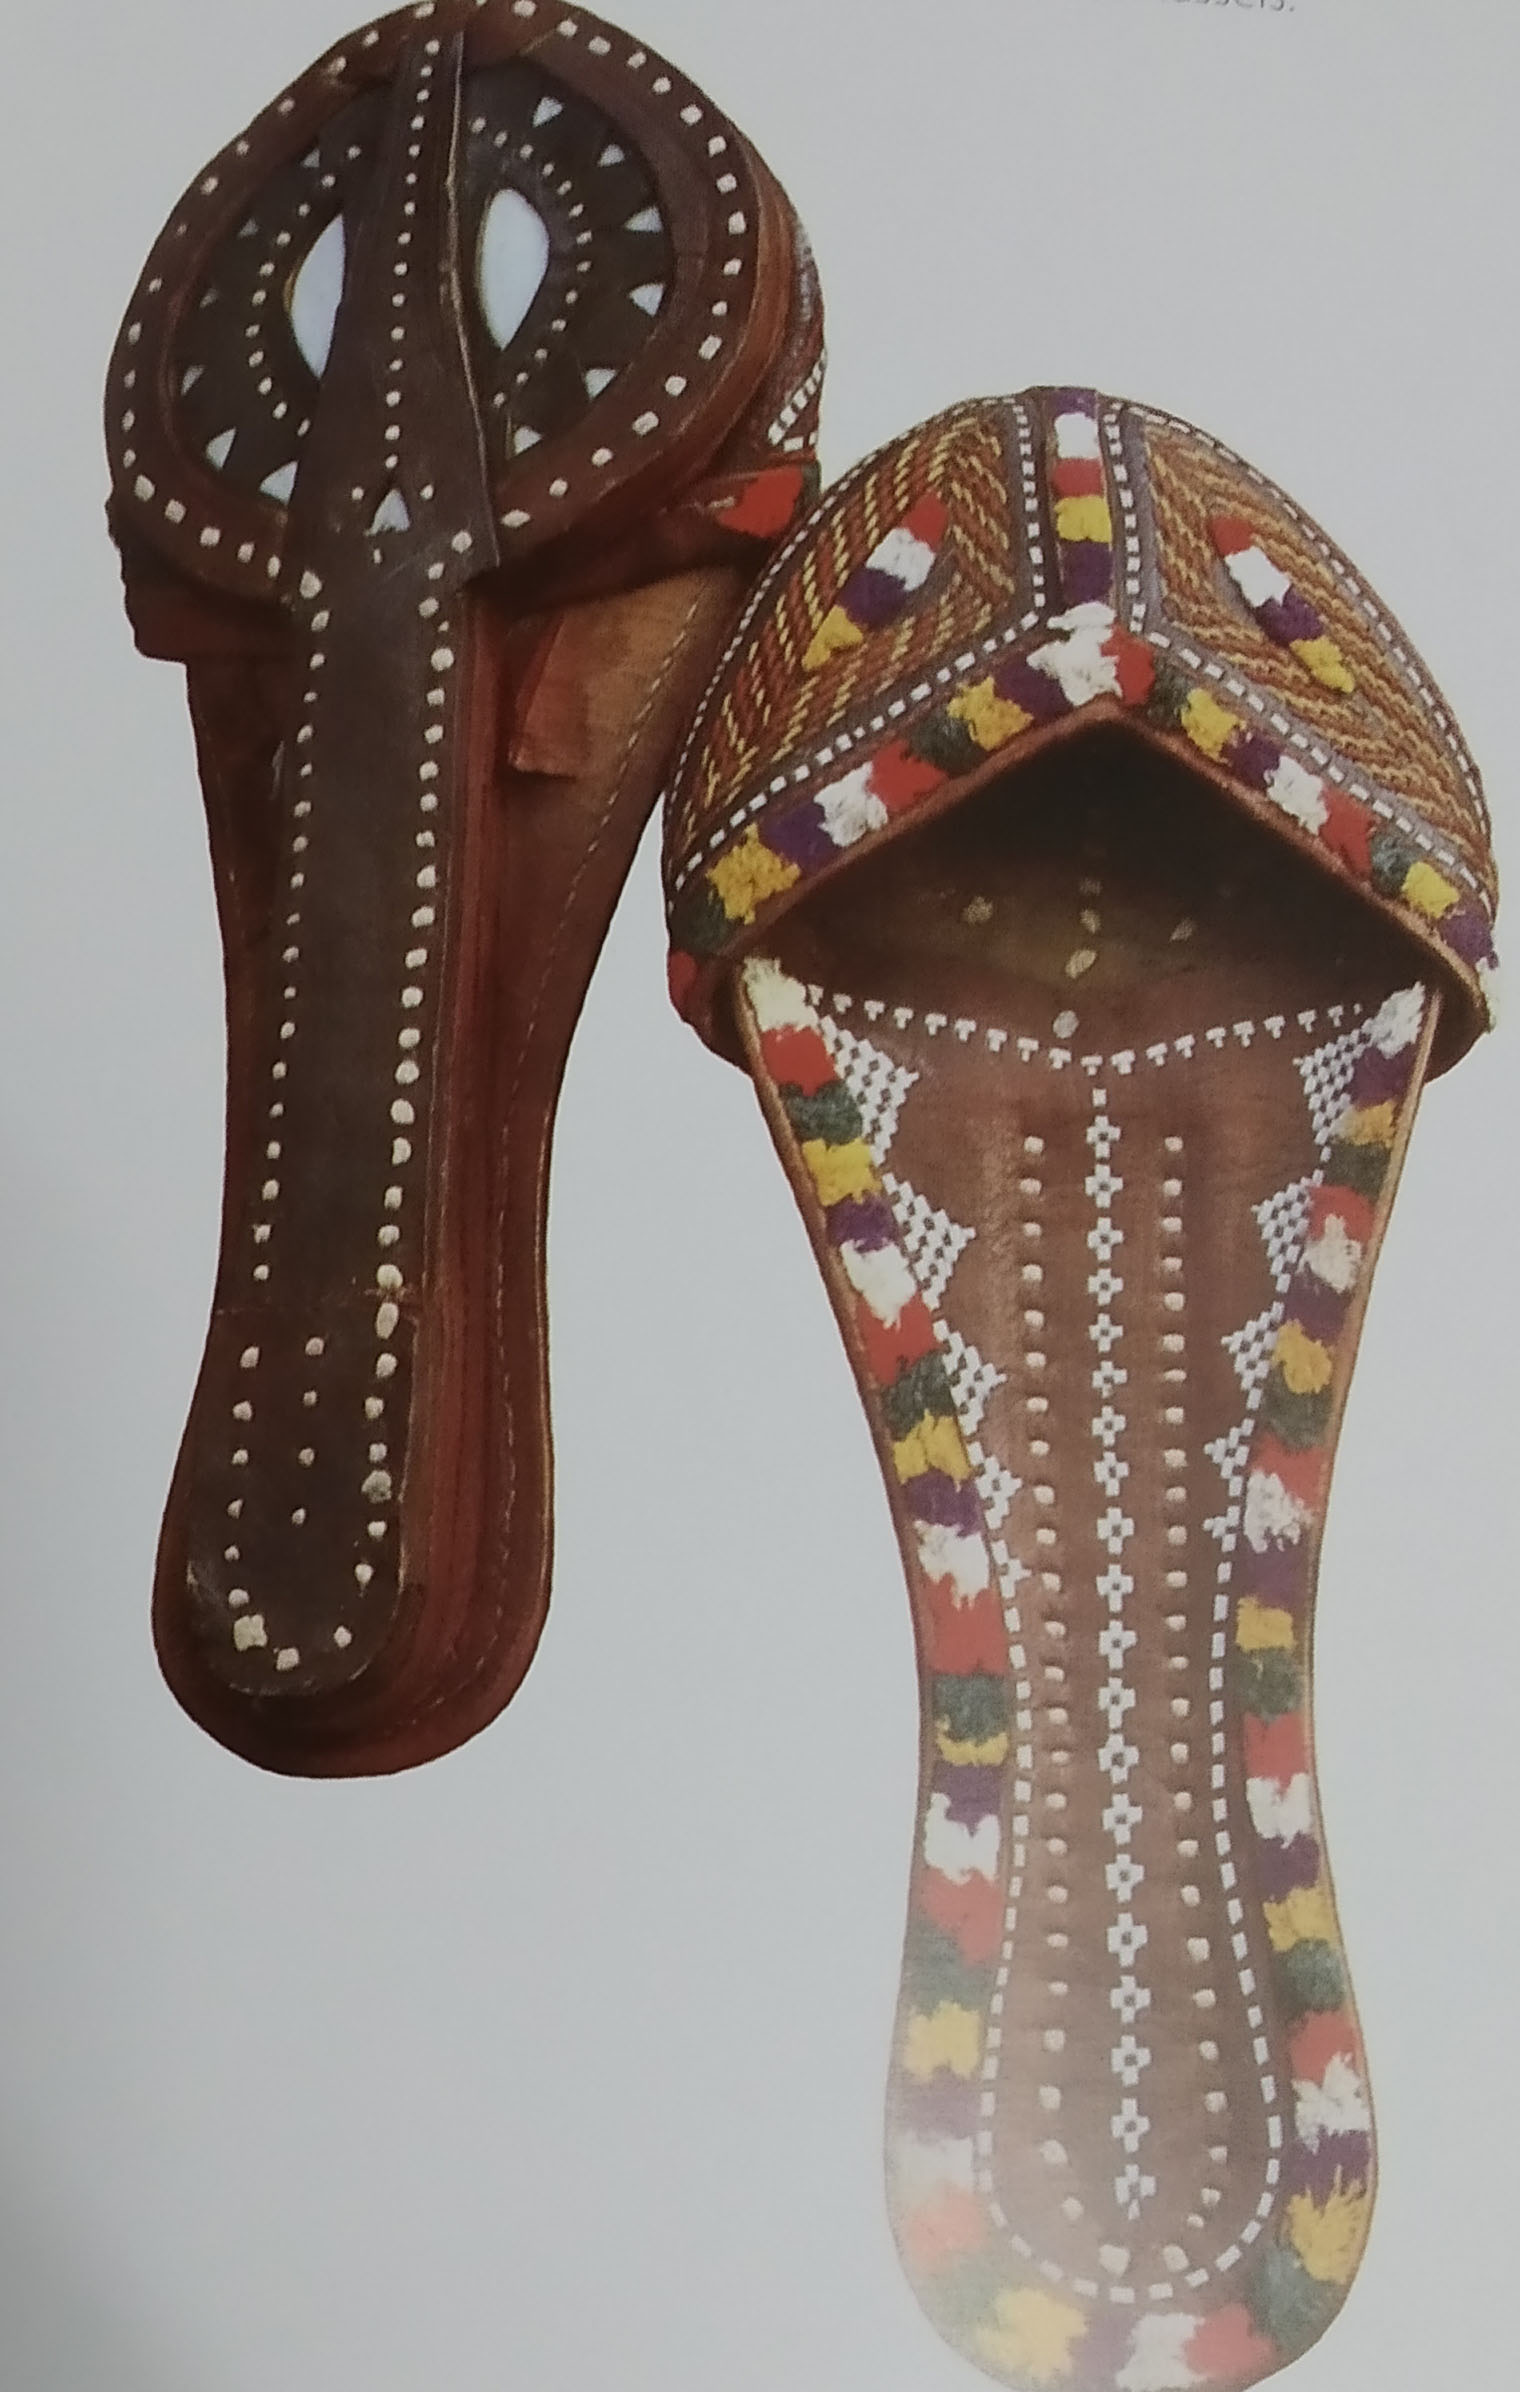 Crewel Embroidered Leather of Tharad, Gujarat